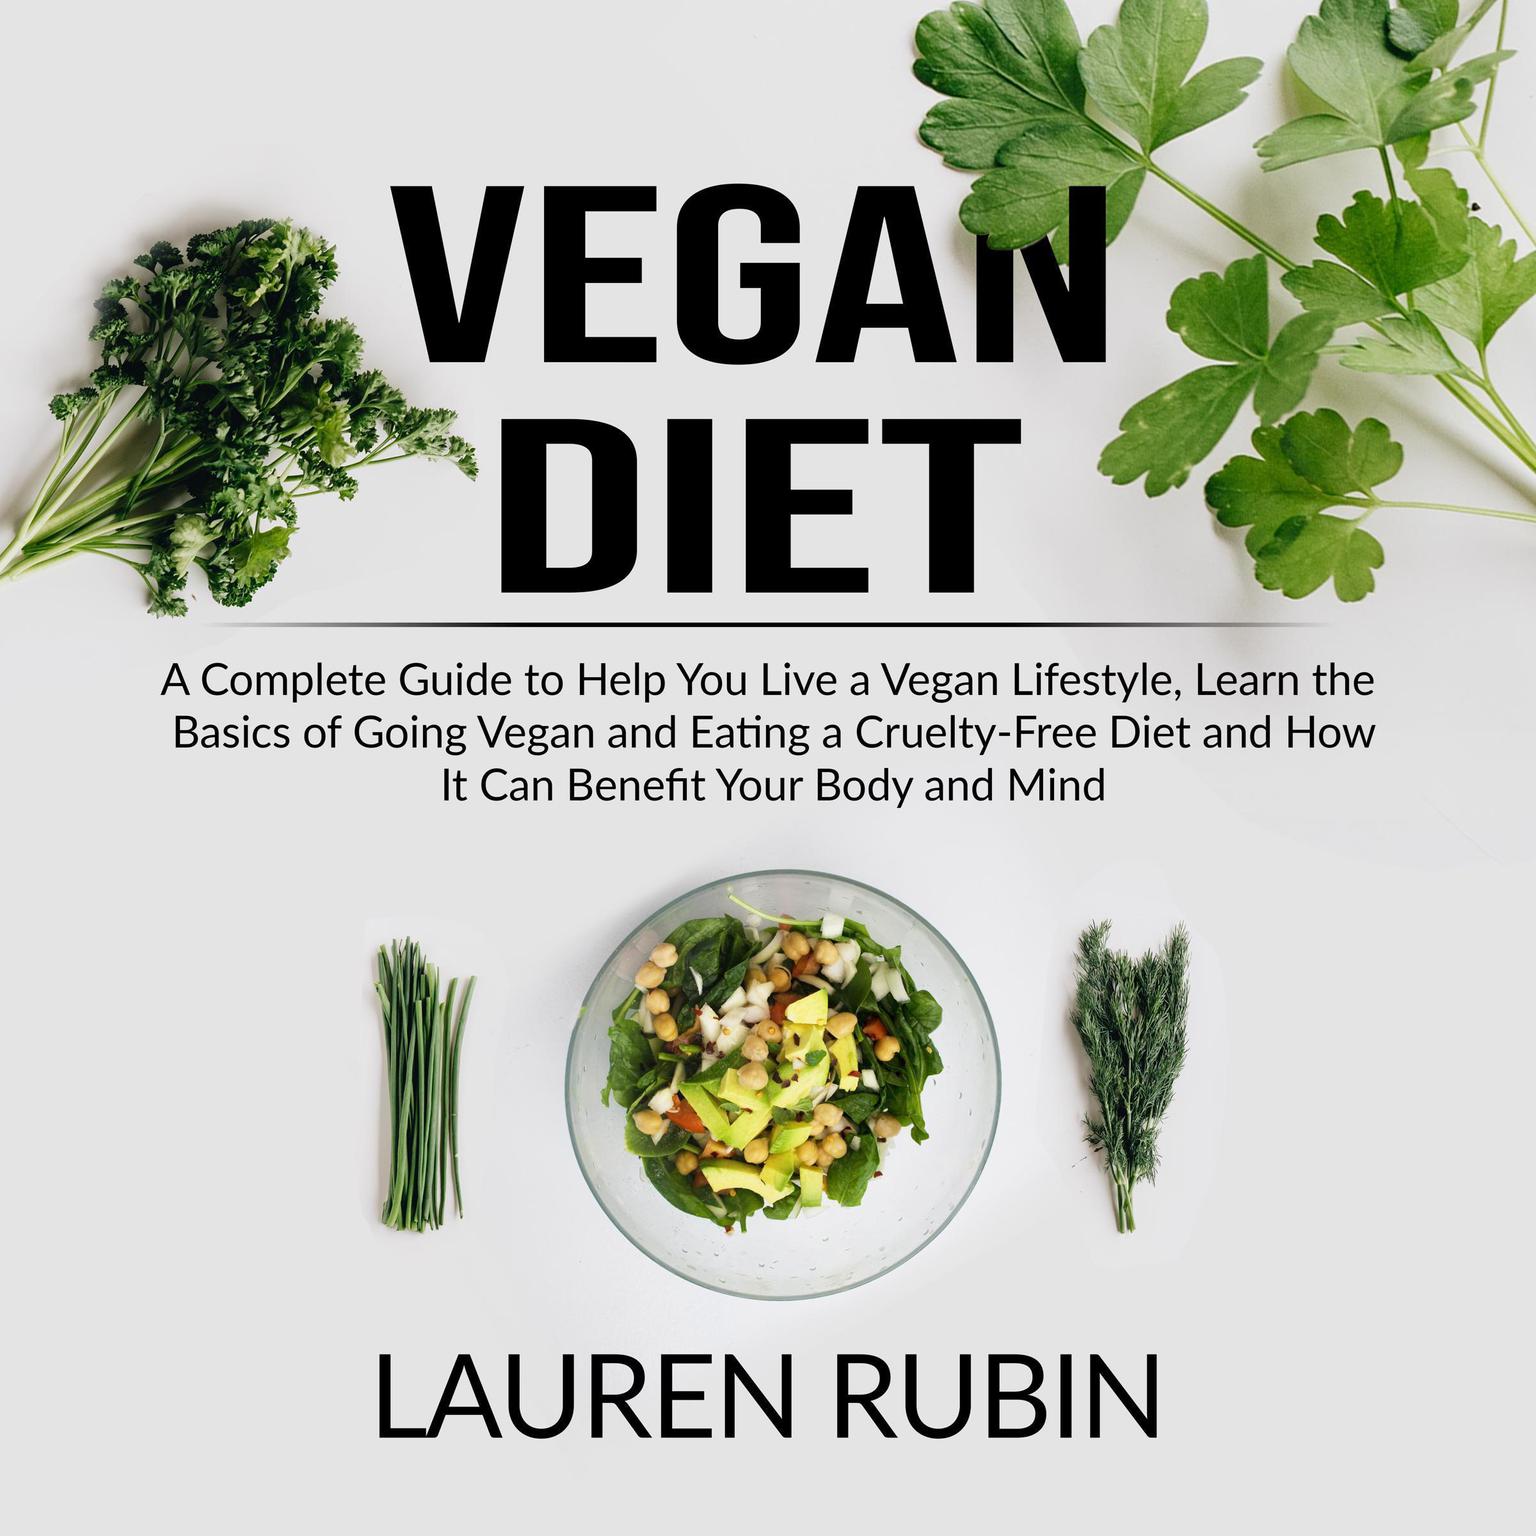 Vegan Diet: : A Complete Guide to Help You Live a Vegan Lifestyle, Learn the Basics of Going Vegan and Eating a Cruelty-Free Diet and How It Can Benefit Your Body and Mind Audiobook, by Lauren Rubin